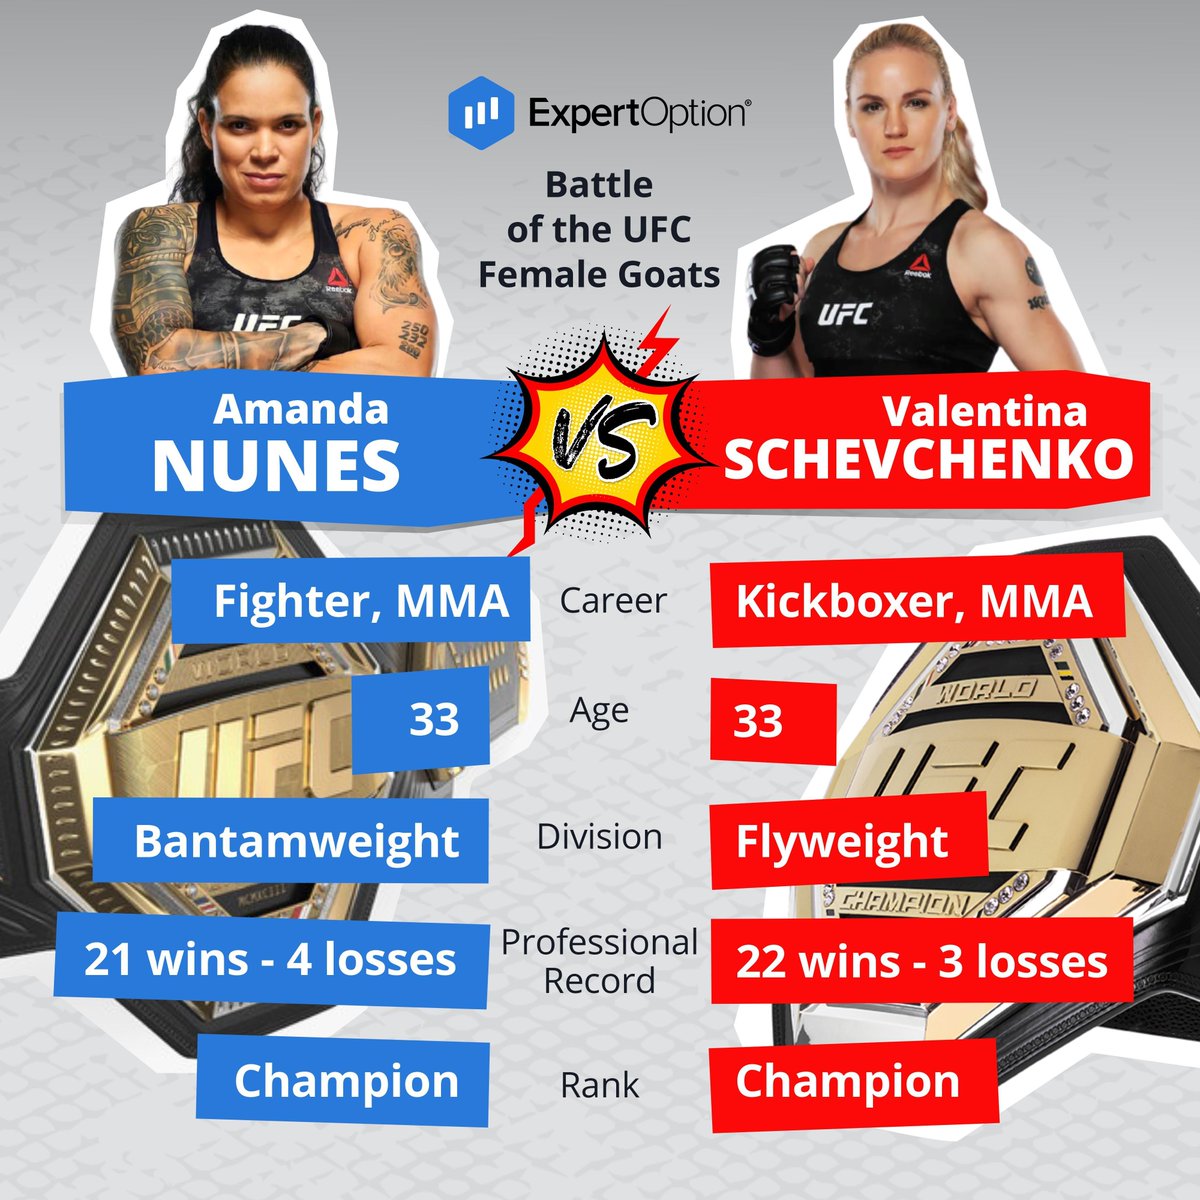 Valentina Shevchenko & Amanda Nunes are GOATS of UFC. Although Nunes has beaten Shevchenko in the past, the credibility of the result is up for debate. If they face off once again, who do you think would emerge champion?

Trade & Profit with ExpertOption: https://t.co/cqssvZU0wN https://t.co/ht3OyAE1pn